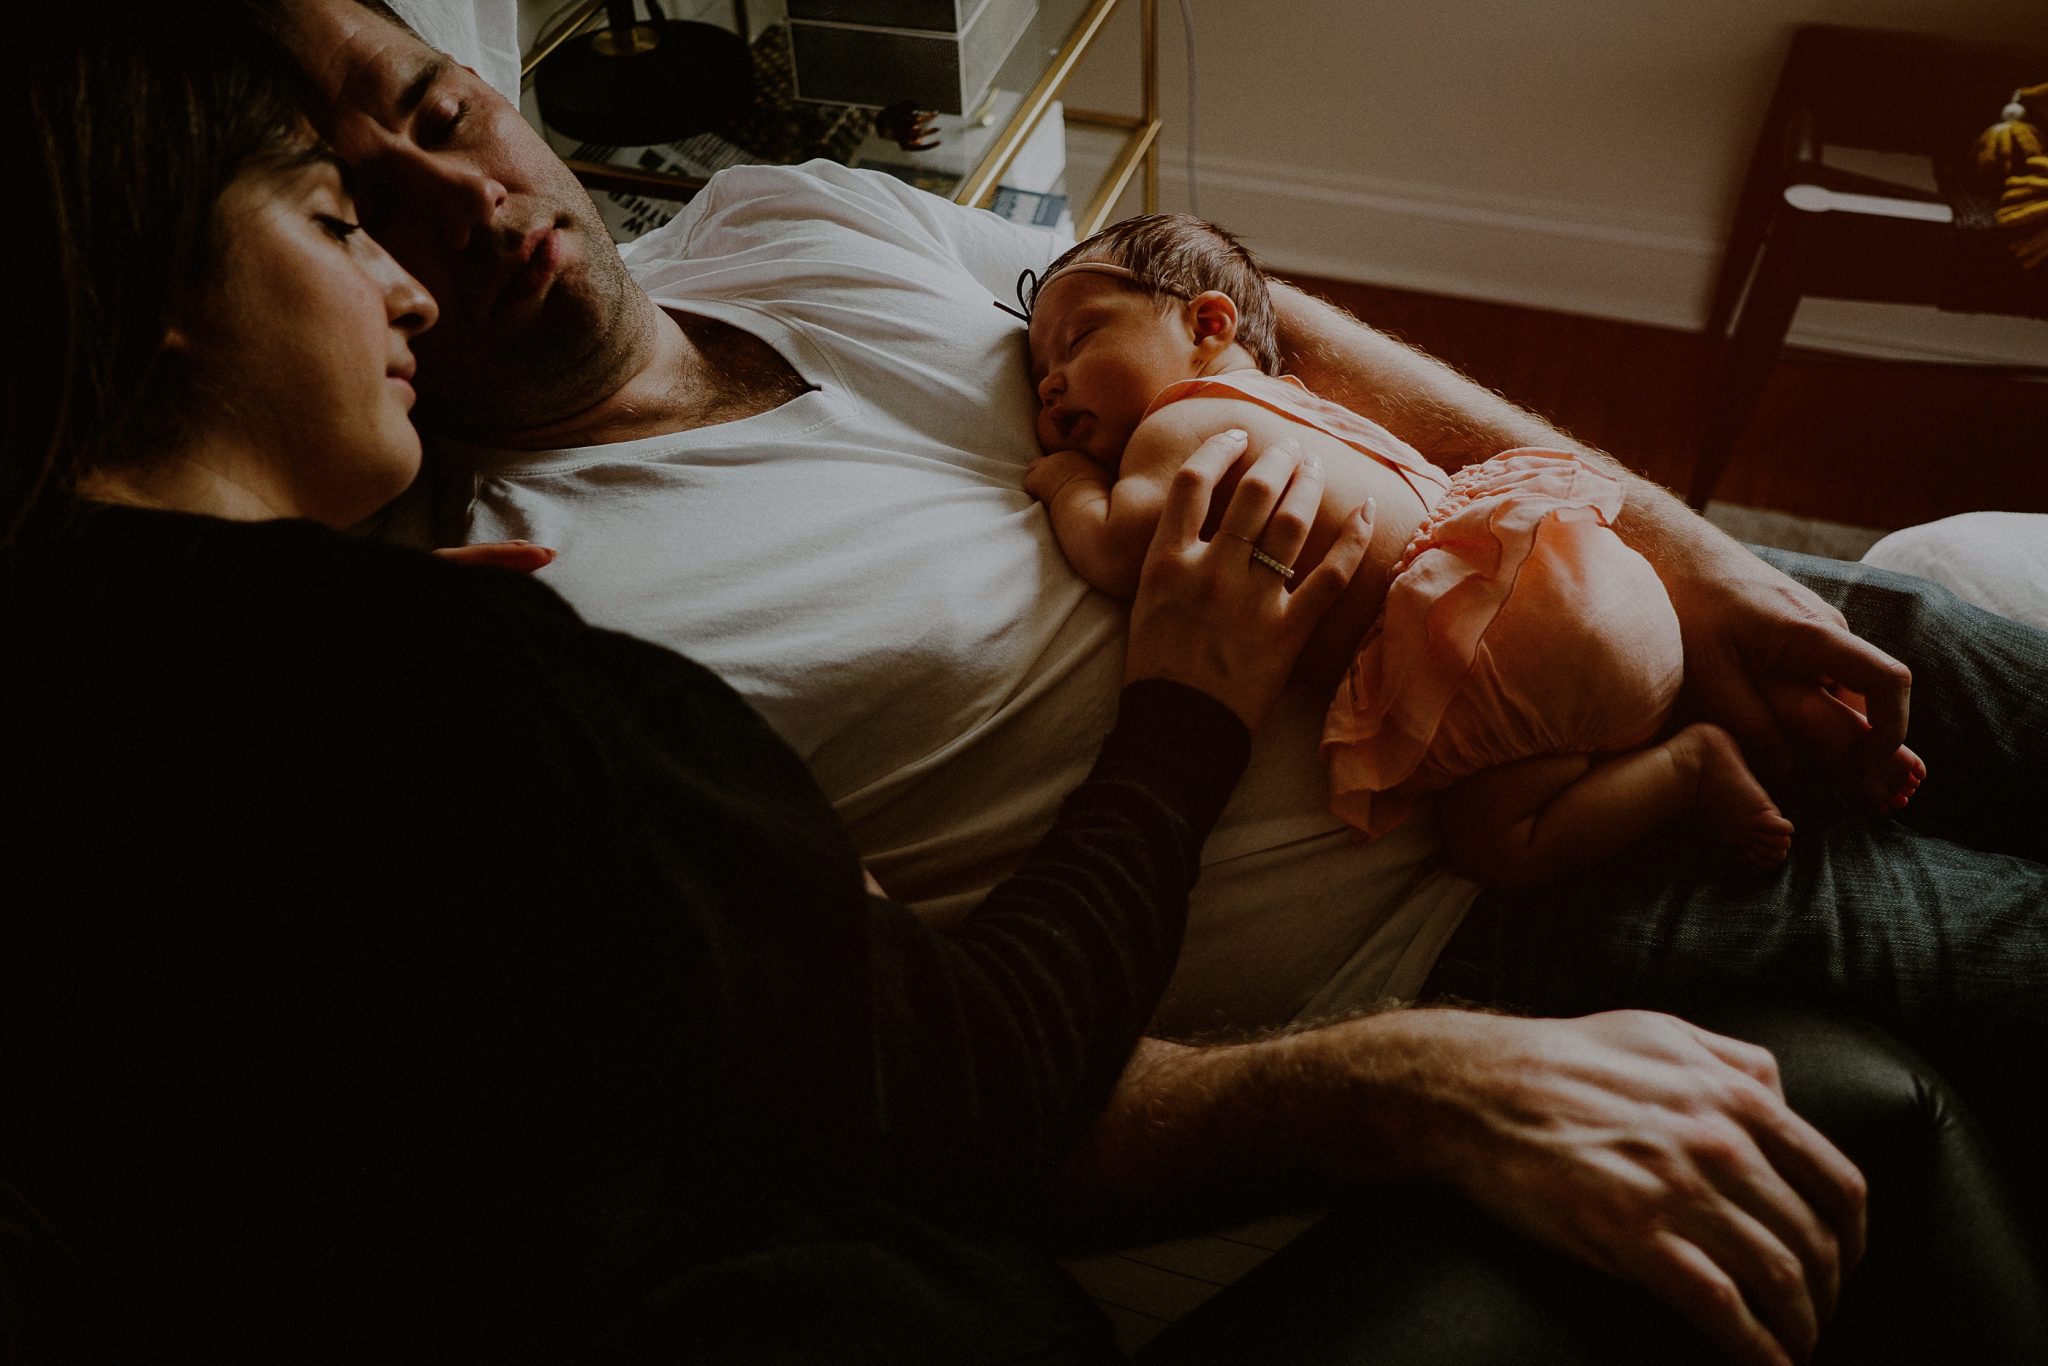 creative family photo of sleeping family together on bed